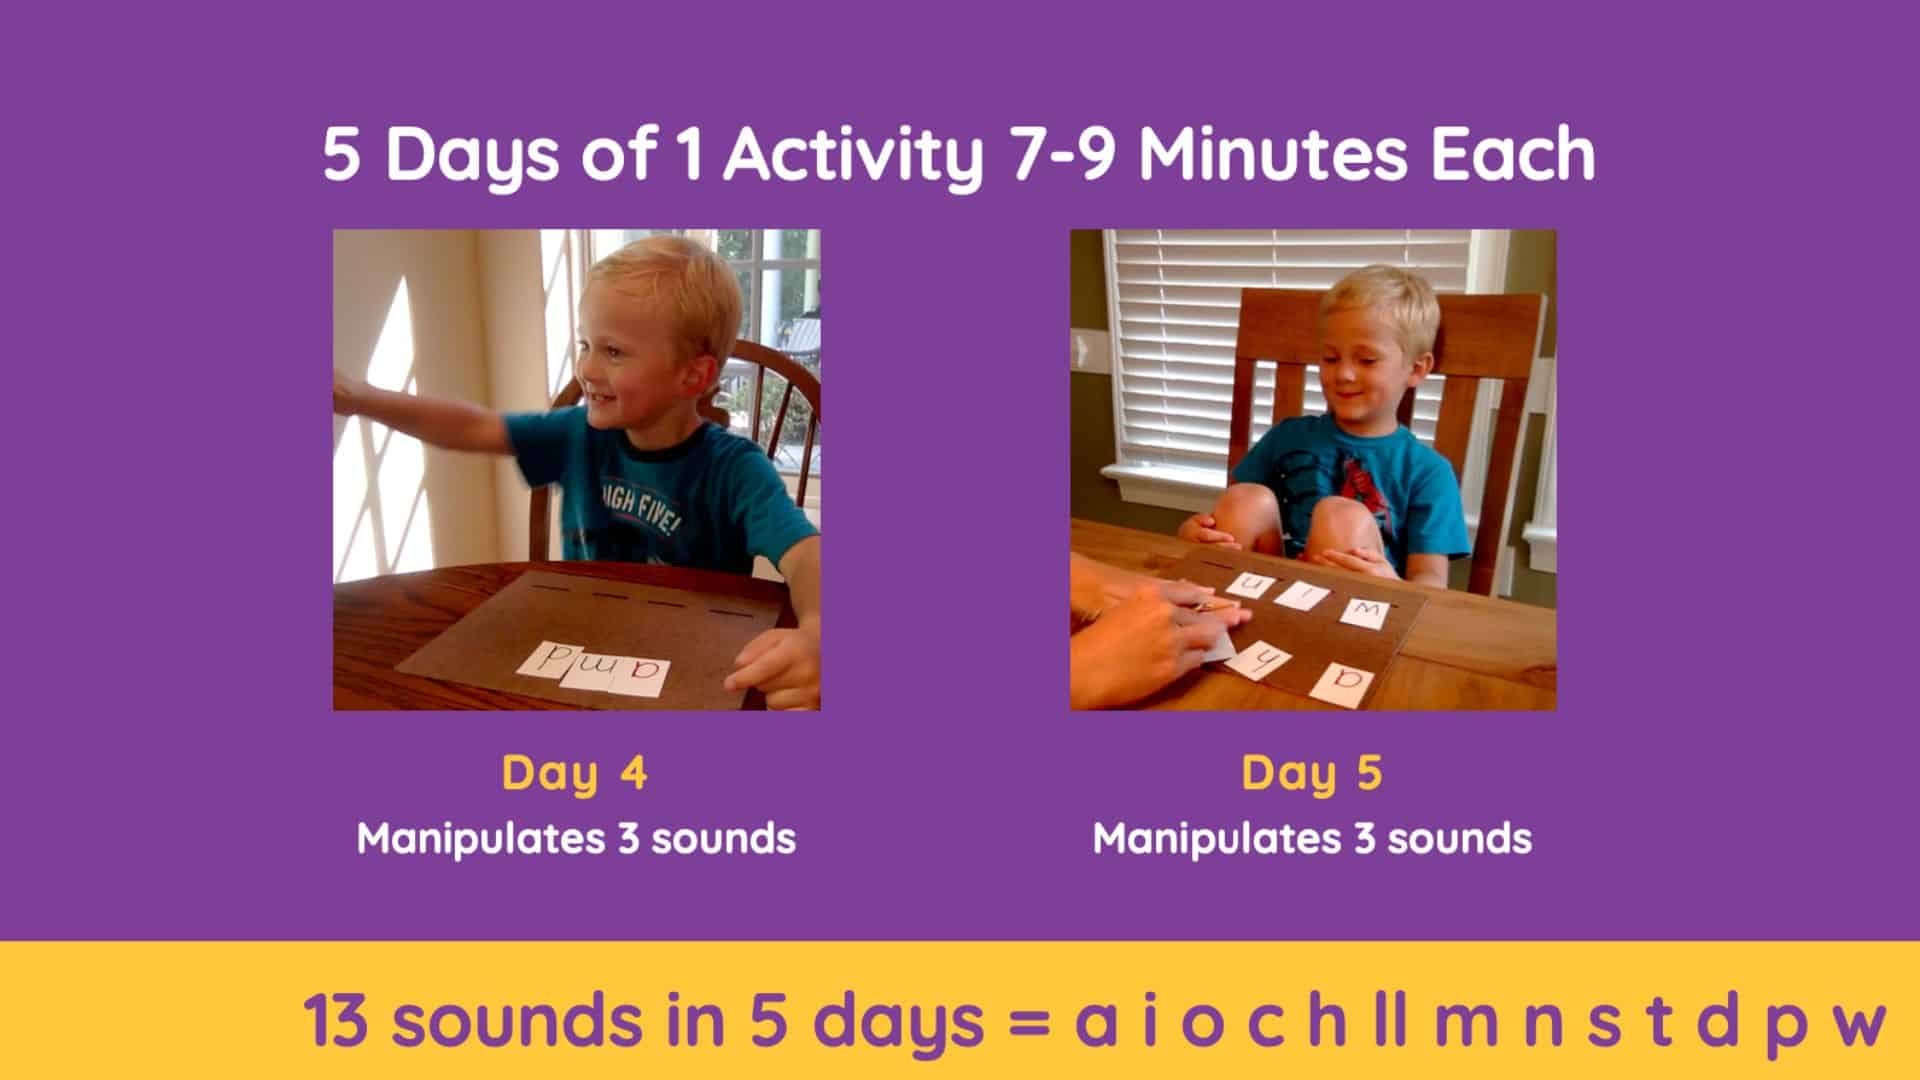 a 4 year-old learns 13 Sounds in 5 days with Build It & Switch It